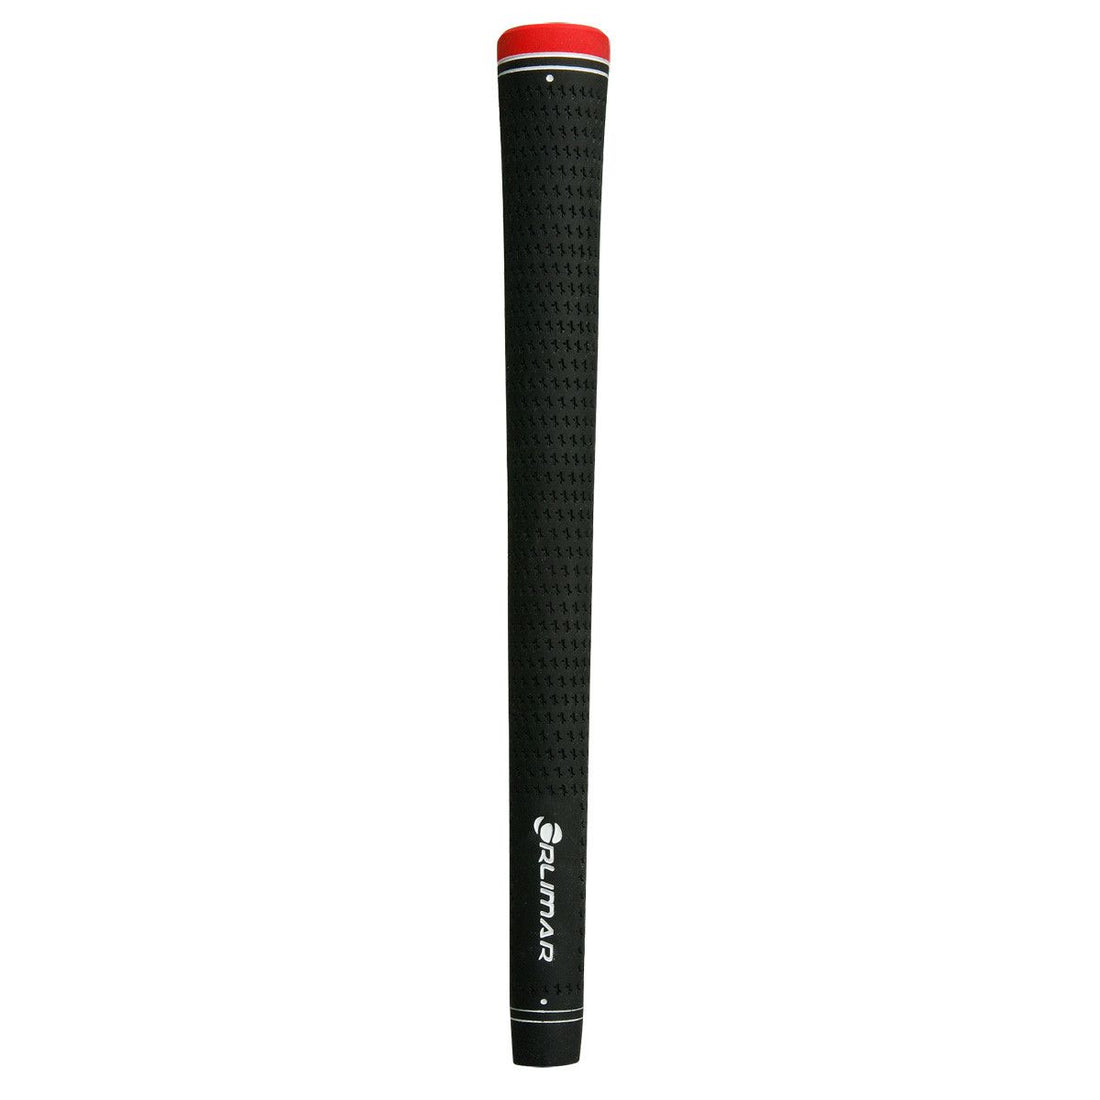 stock black golf grip of an Orlimar Escape Wedge